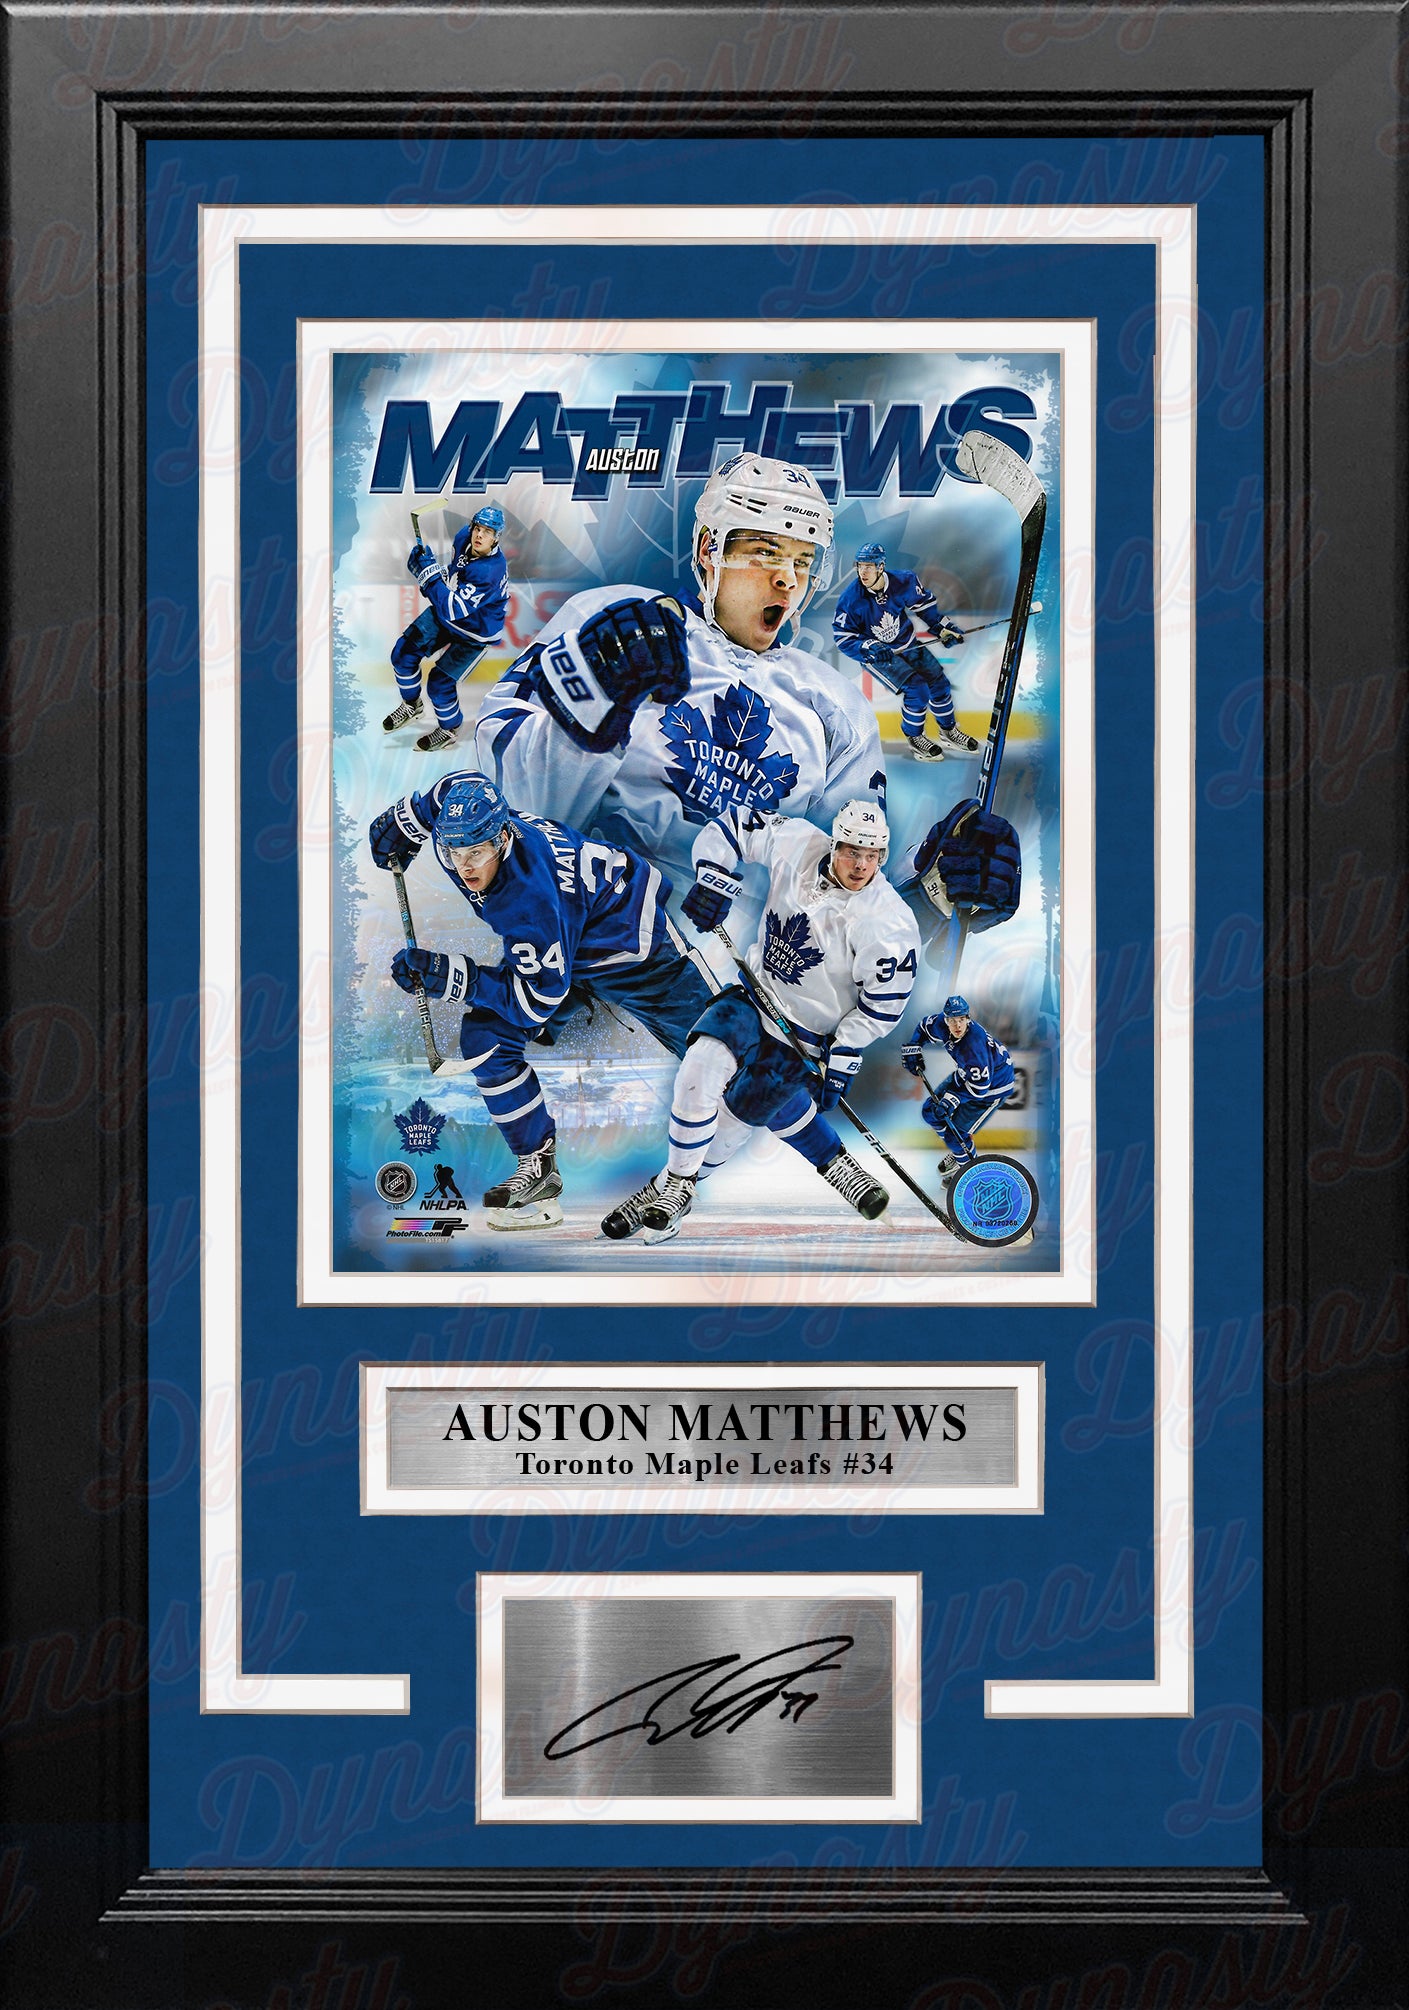 Auston Matthews Toronto Maple Leafs 8" x 10" Framed Hockey Collage Photo with Engraved Autograph - Dynasty Sports & Framing 